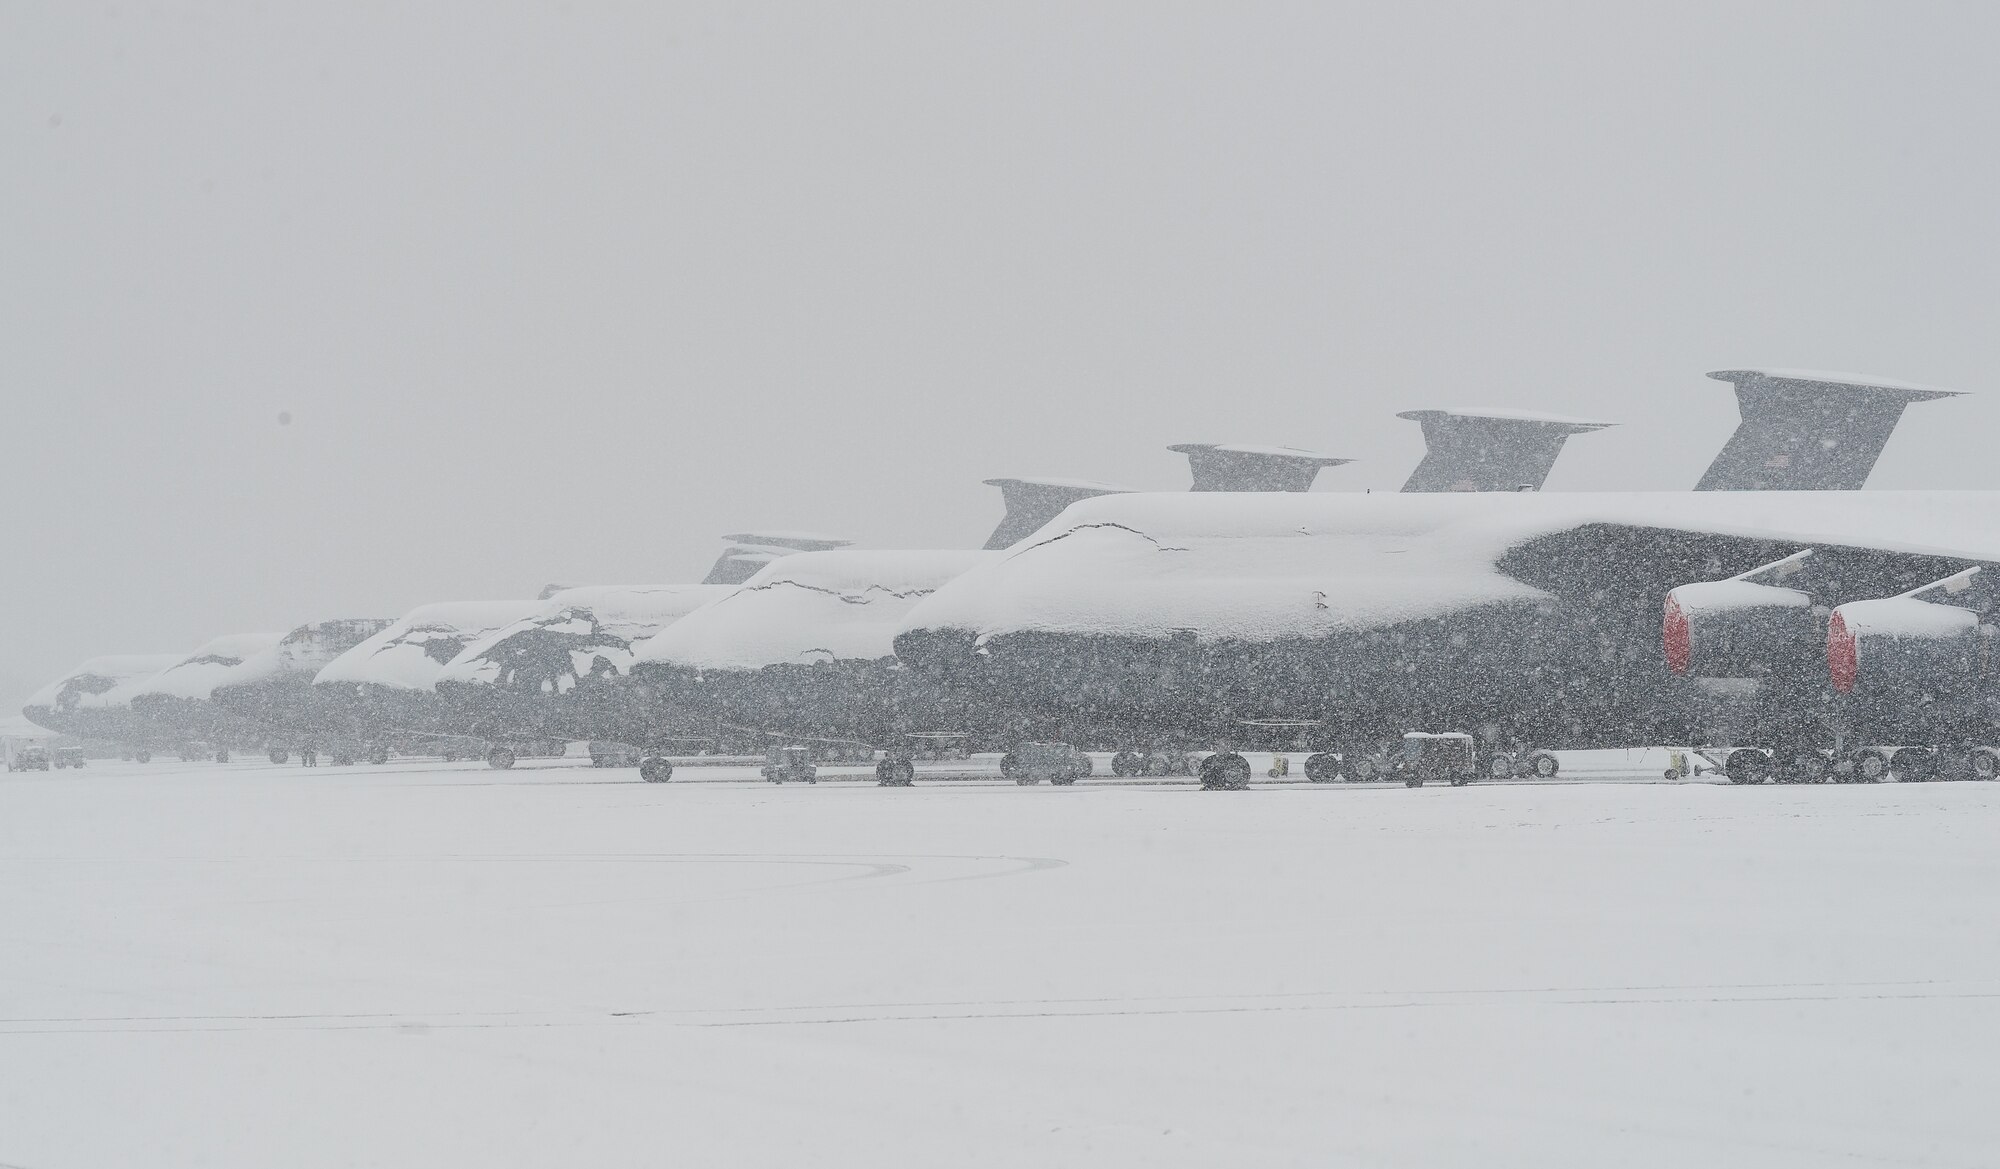 Snow-covered C-5M Super Galaxy aircraft sit on the flight line at Dover Air Force Base, Delaware, Feb. 11, 2021. As Winter Storm Roland produced a wintry mix of precipitation, the base continued normal operations and prepared for additional forecast snowfall. (U.S. Air Force photo by Roland Balik)